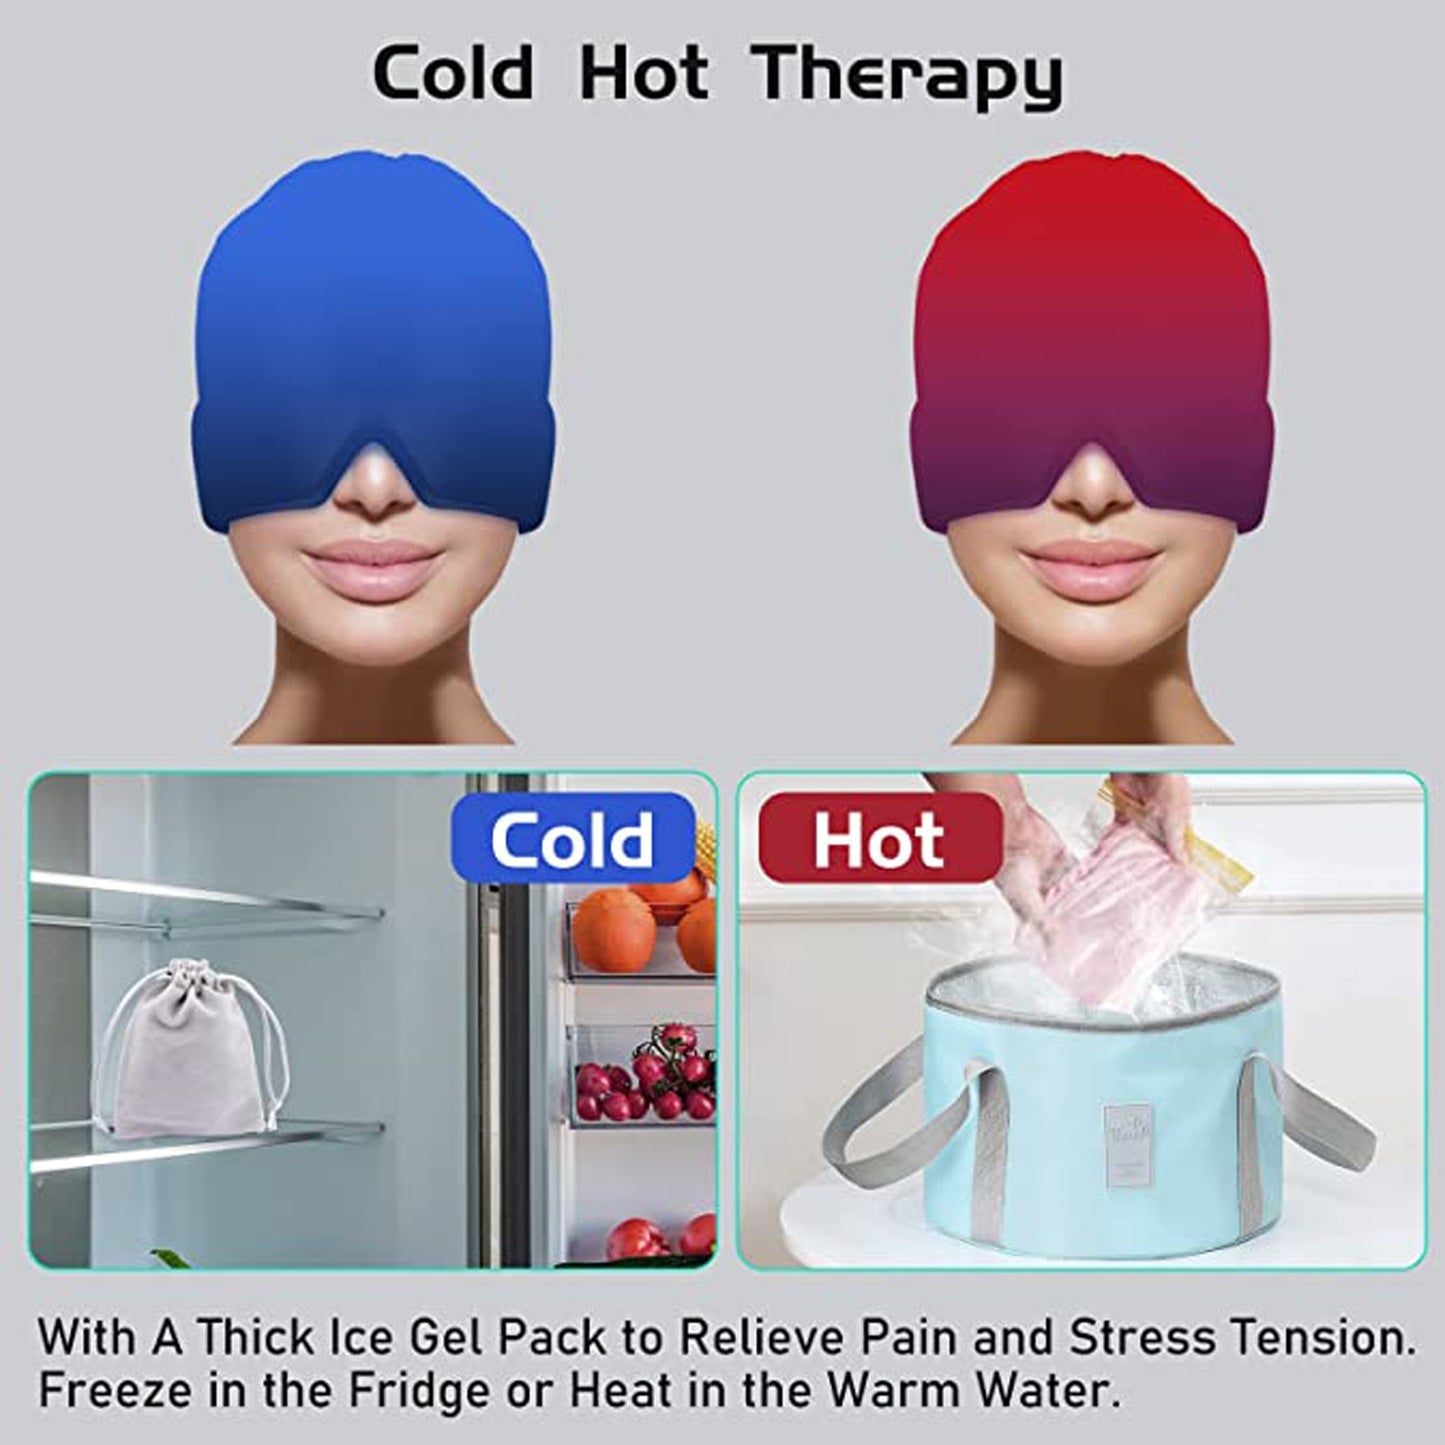 CoolEase™ Instant Headache Relief Band